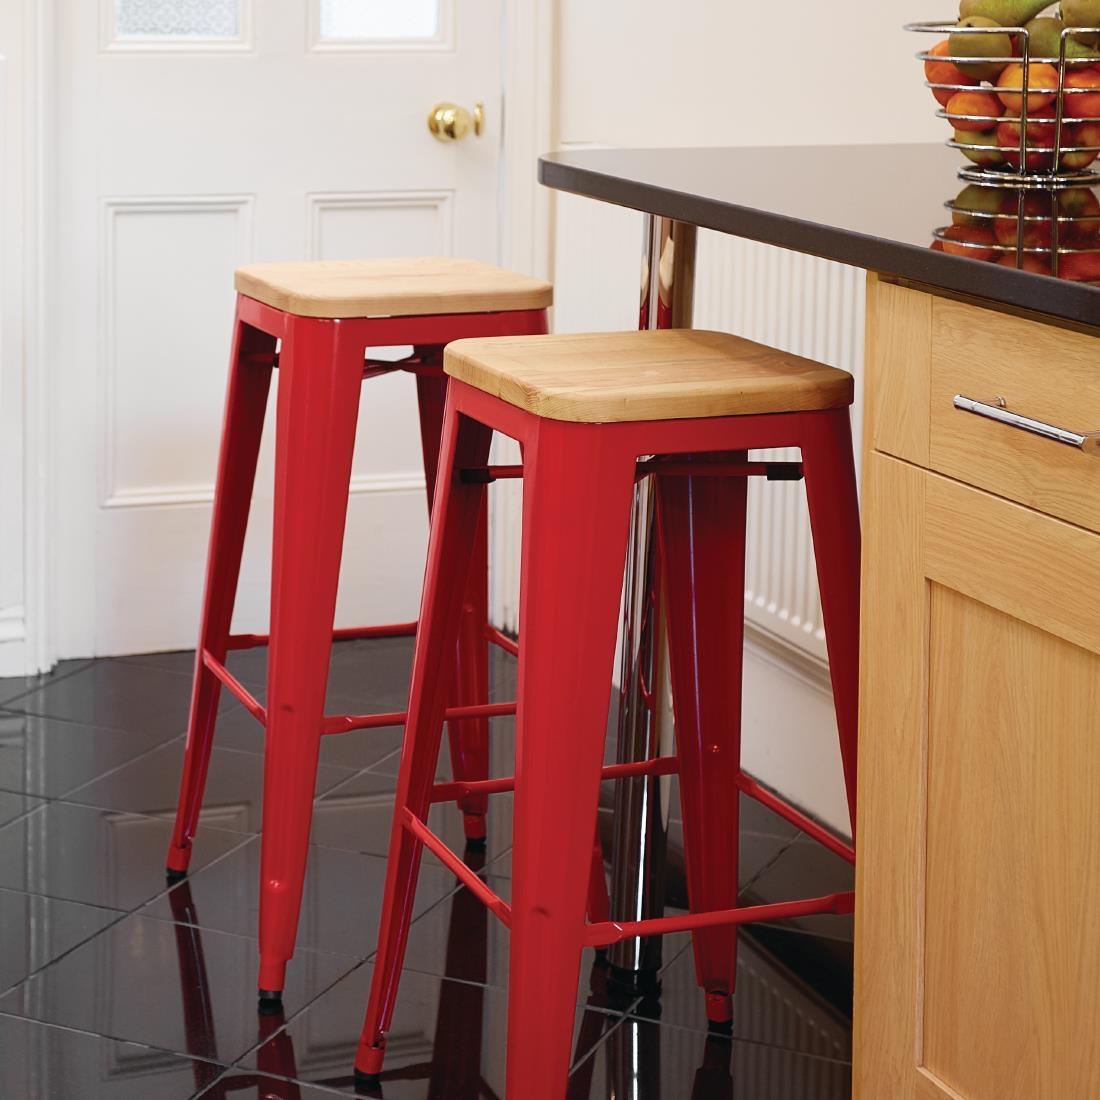 Bolero Bistro High Stools with Wooden Seat Pad Red (Pack of 4) - GM641  - 2